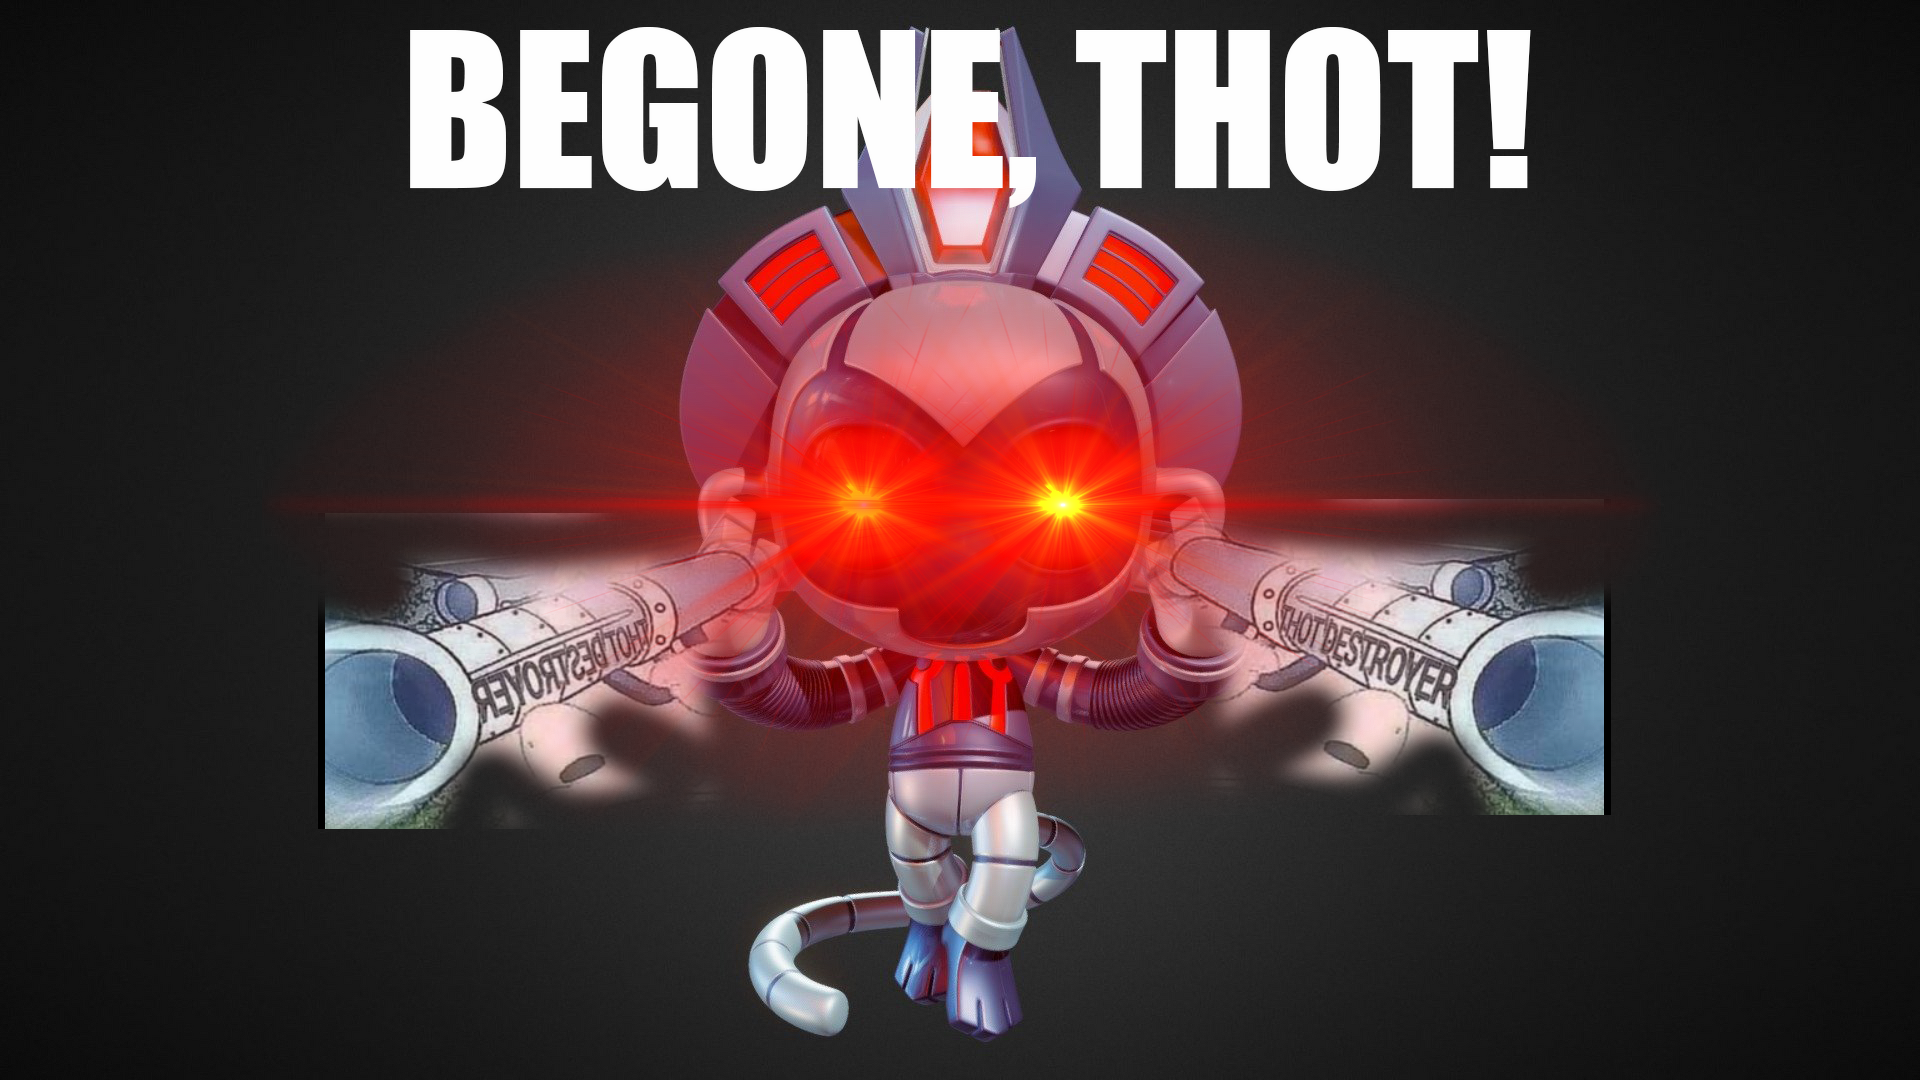 Thot Destroyed